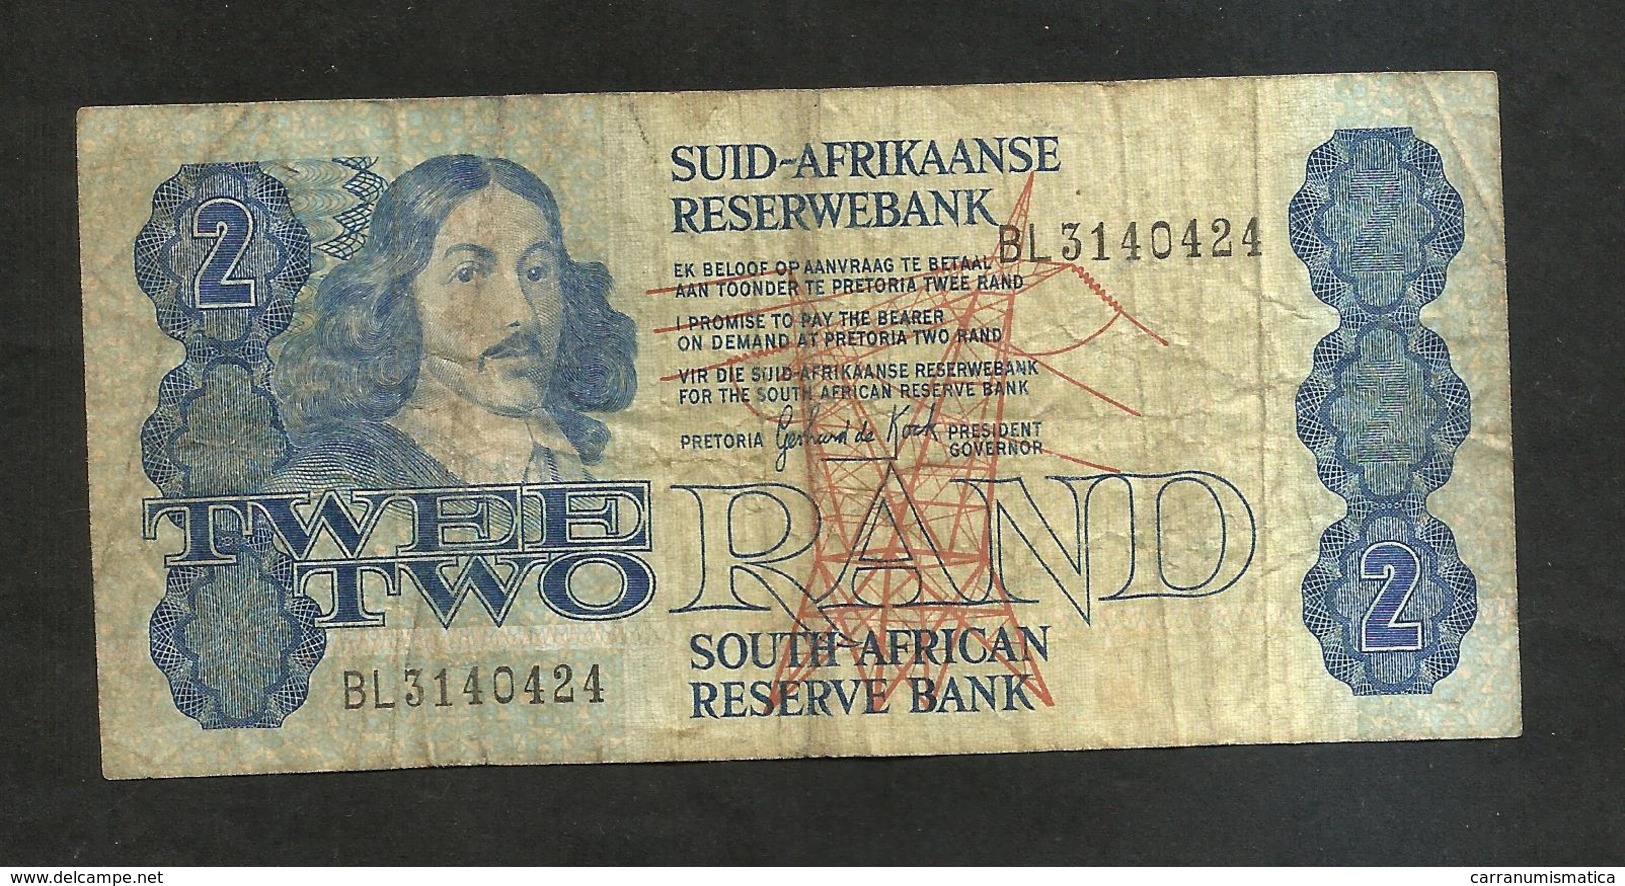 SOUTH AFRICA - SOUTH AFRICAN RESERVE BANK - 2 RAND - South Africa